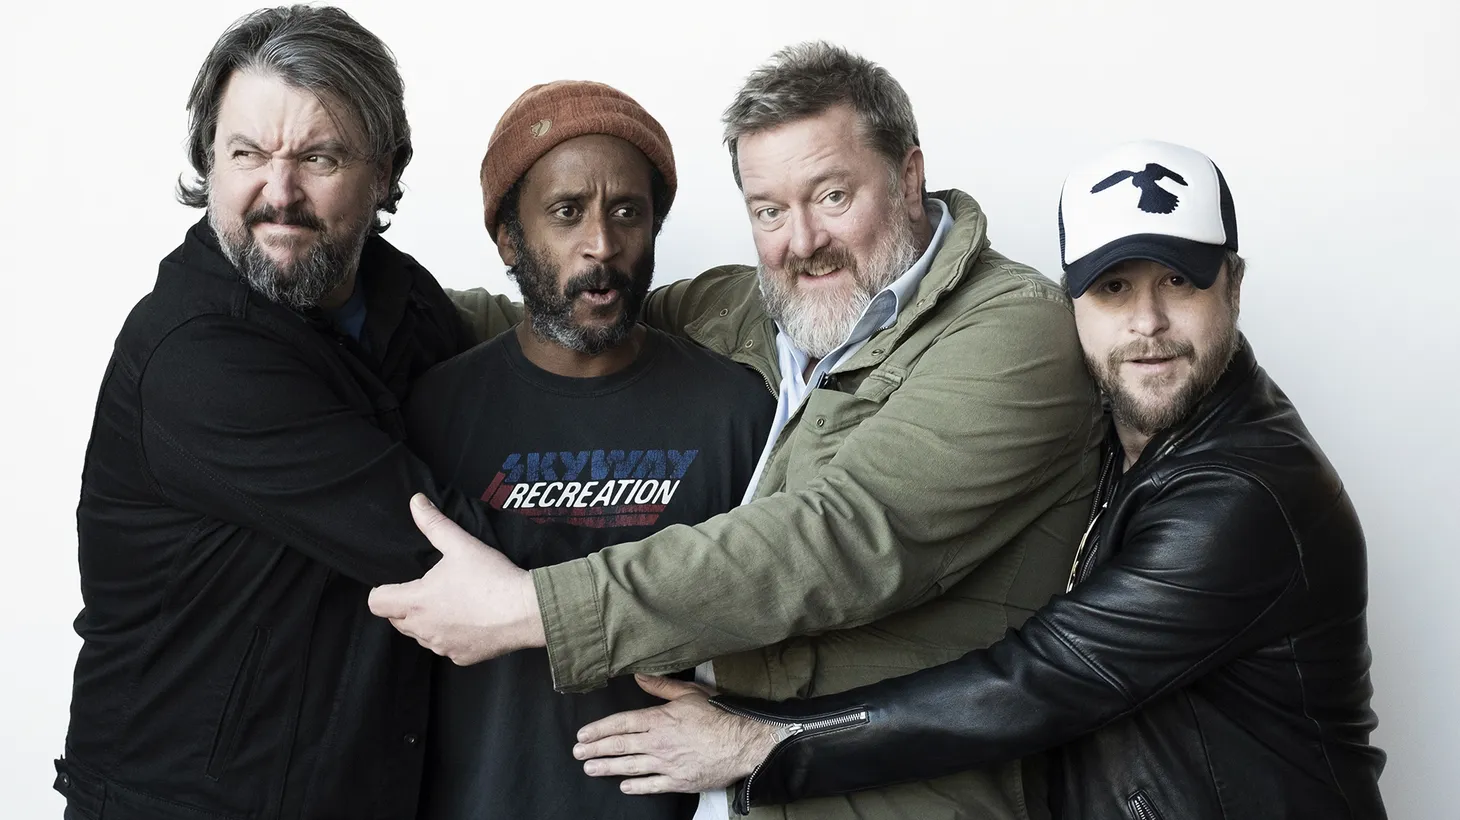 Elbow's latest album Giants of All Sizes expresses their feelings of mourning and loss both personal and national. Frontman Guy Garvey describes the record as "having a huge-but-bruised heart."